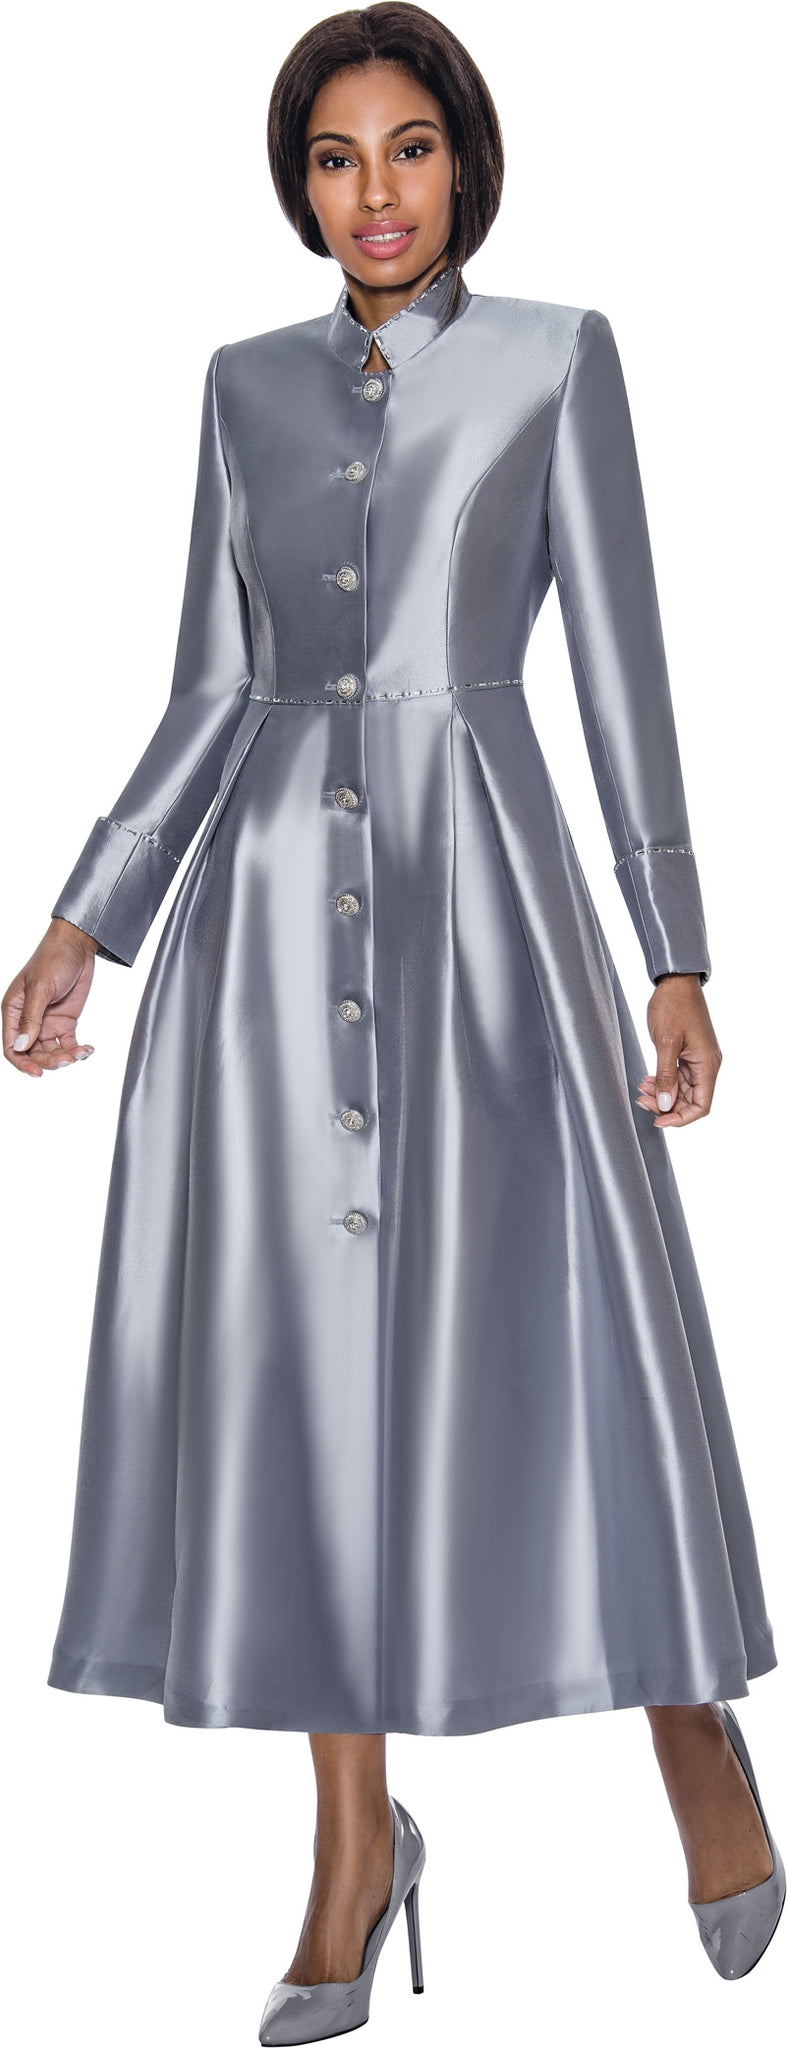 Terramina Clergy Dress 7058-Silver - Church Suits For Less